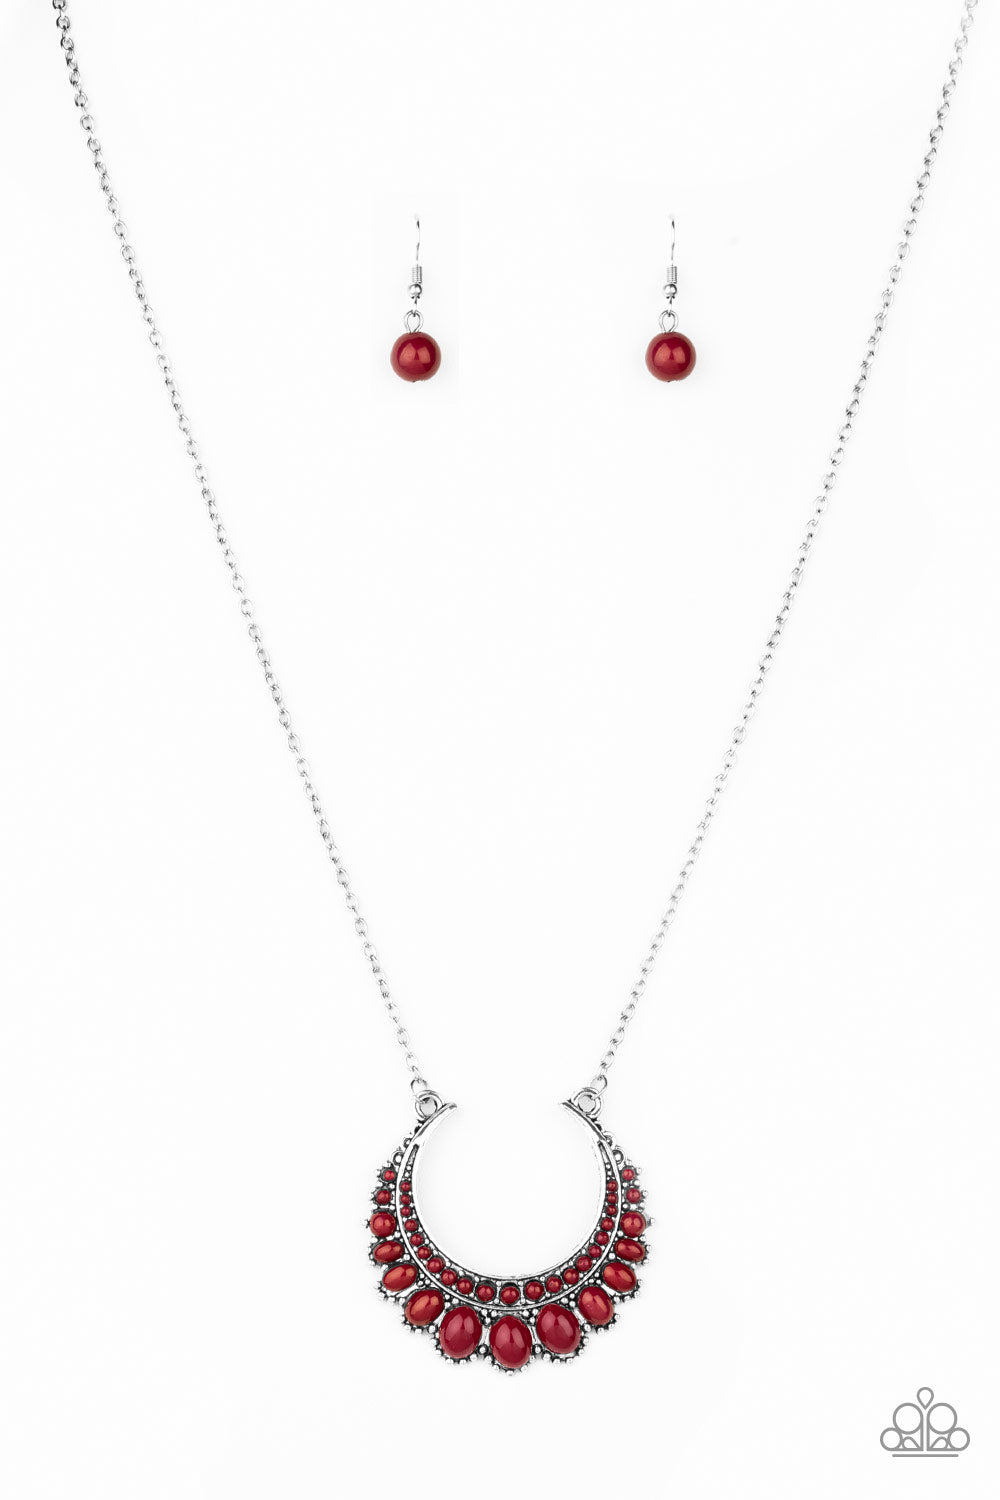 Count To ZEN Necklace - Red